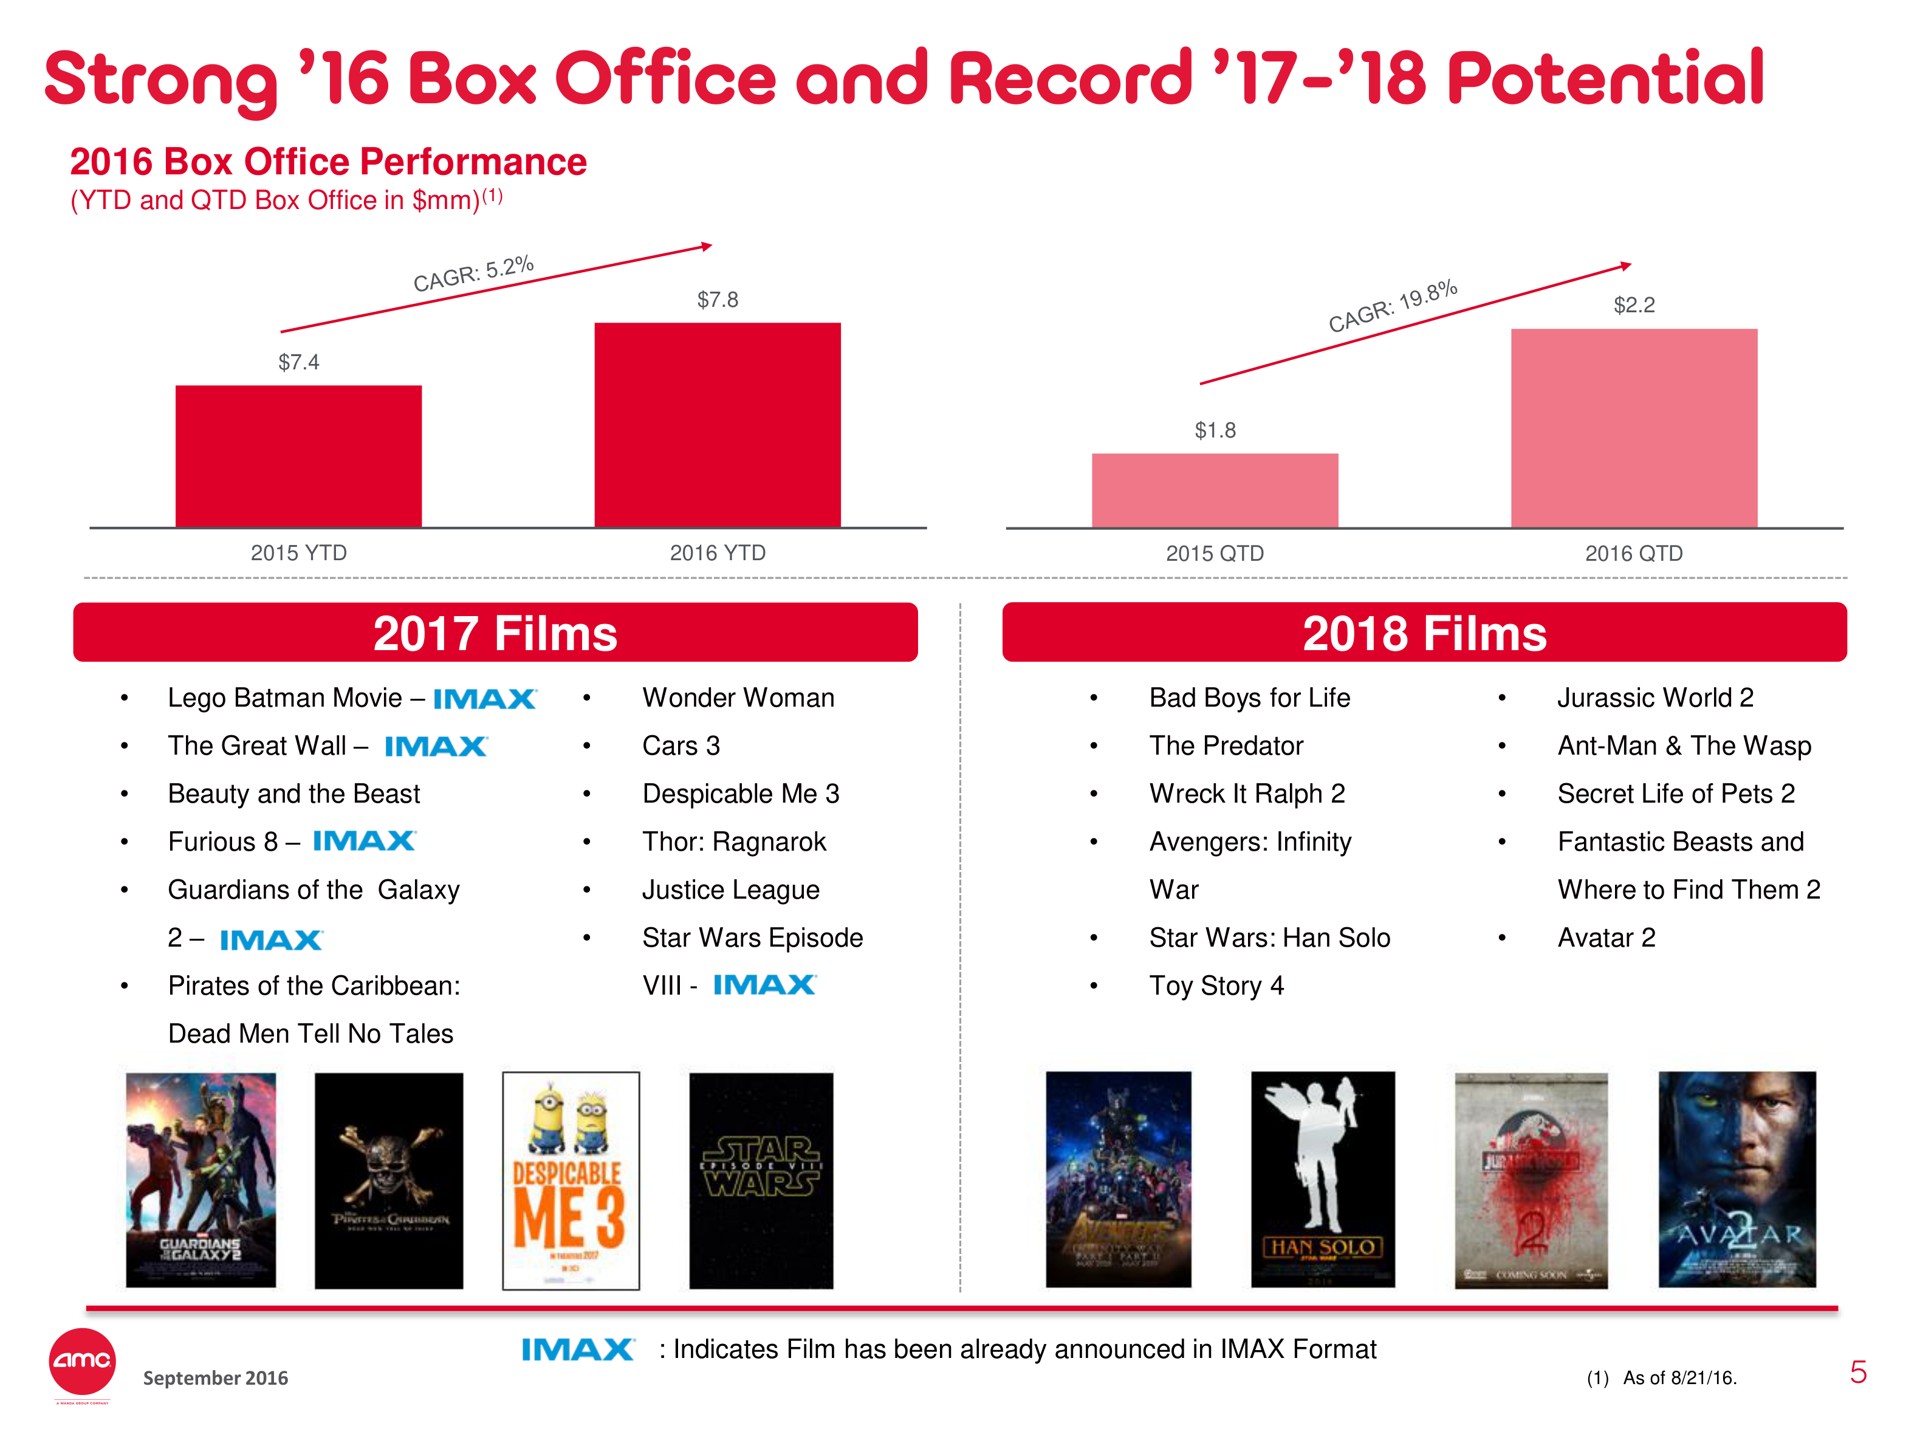 strong box office and record potential films | AMC